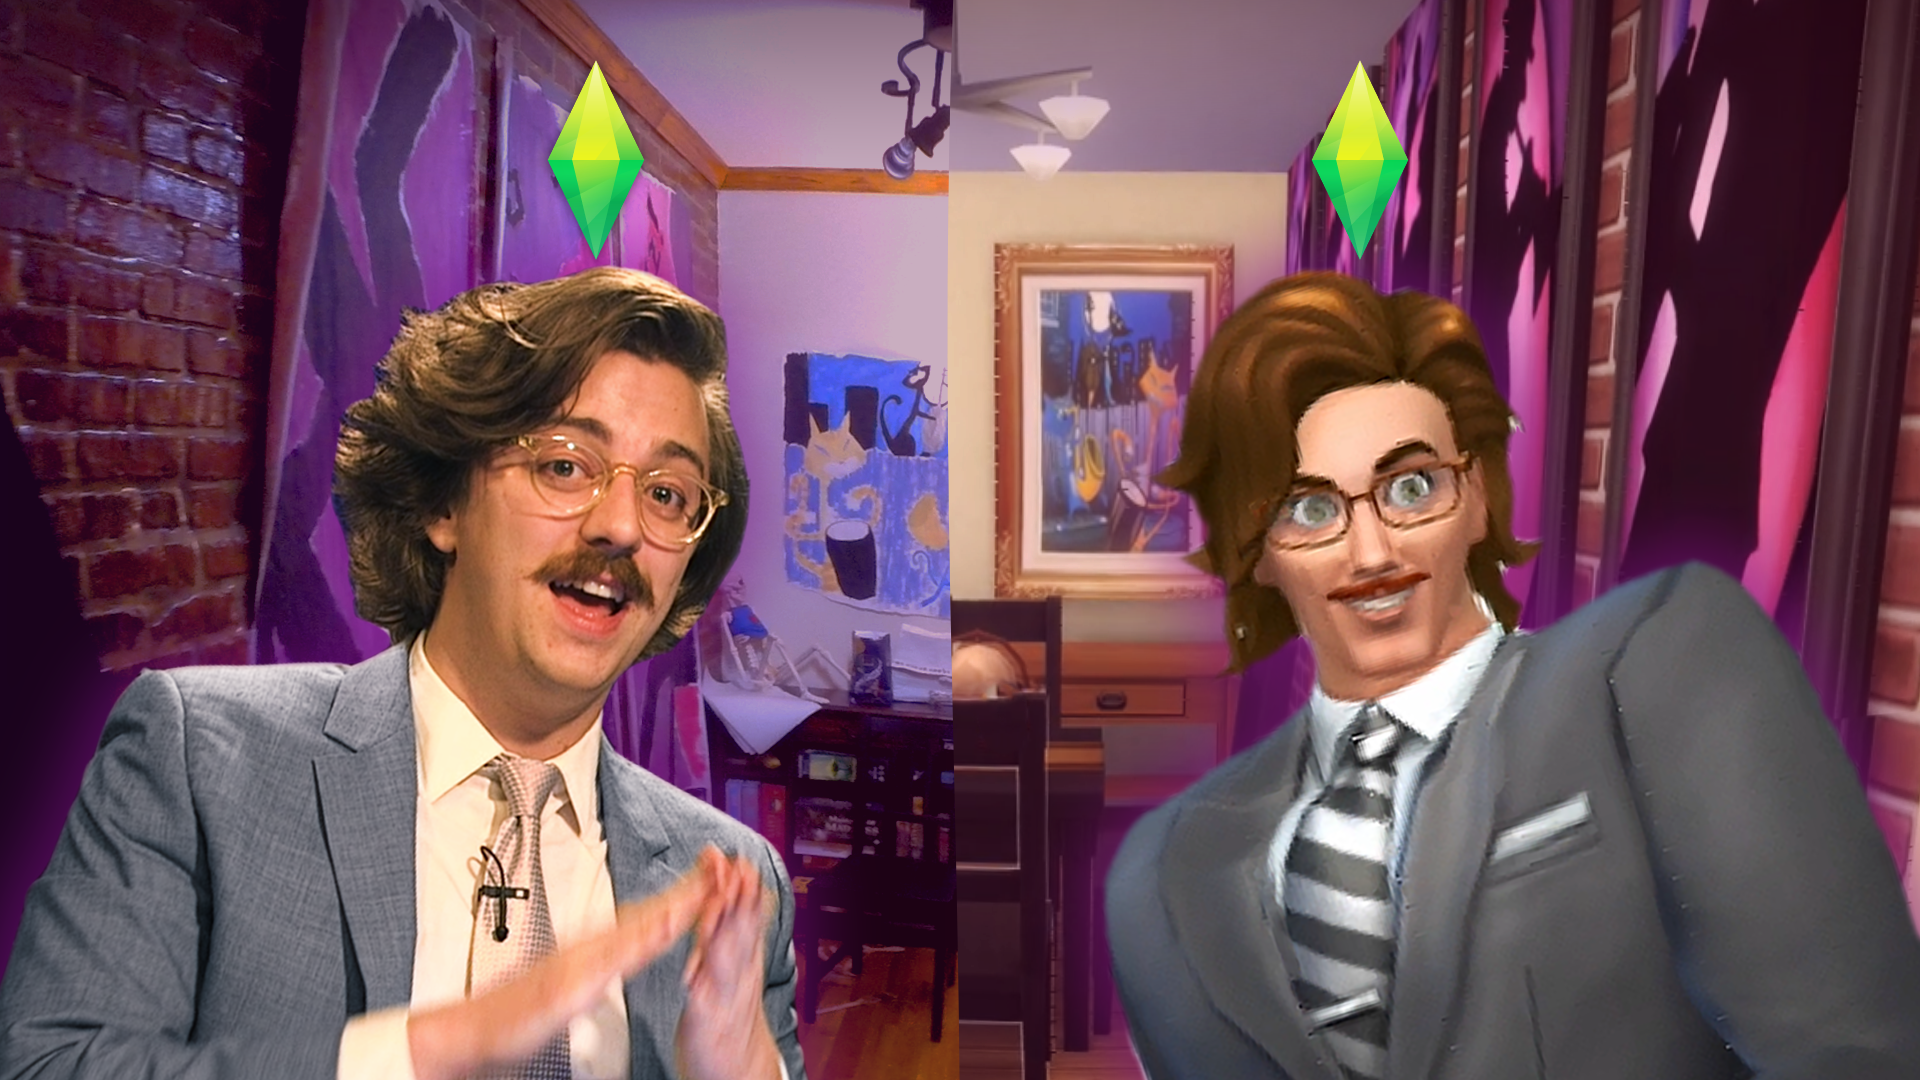 Brian David Gilbert stands next to a Sim version of himself. Behind them is a split room, one real, one recreated in The Sims.